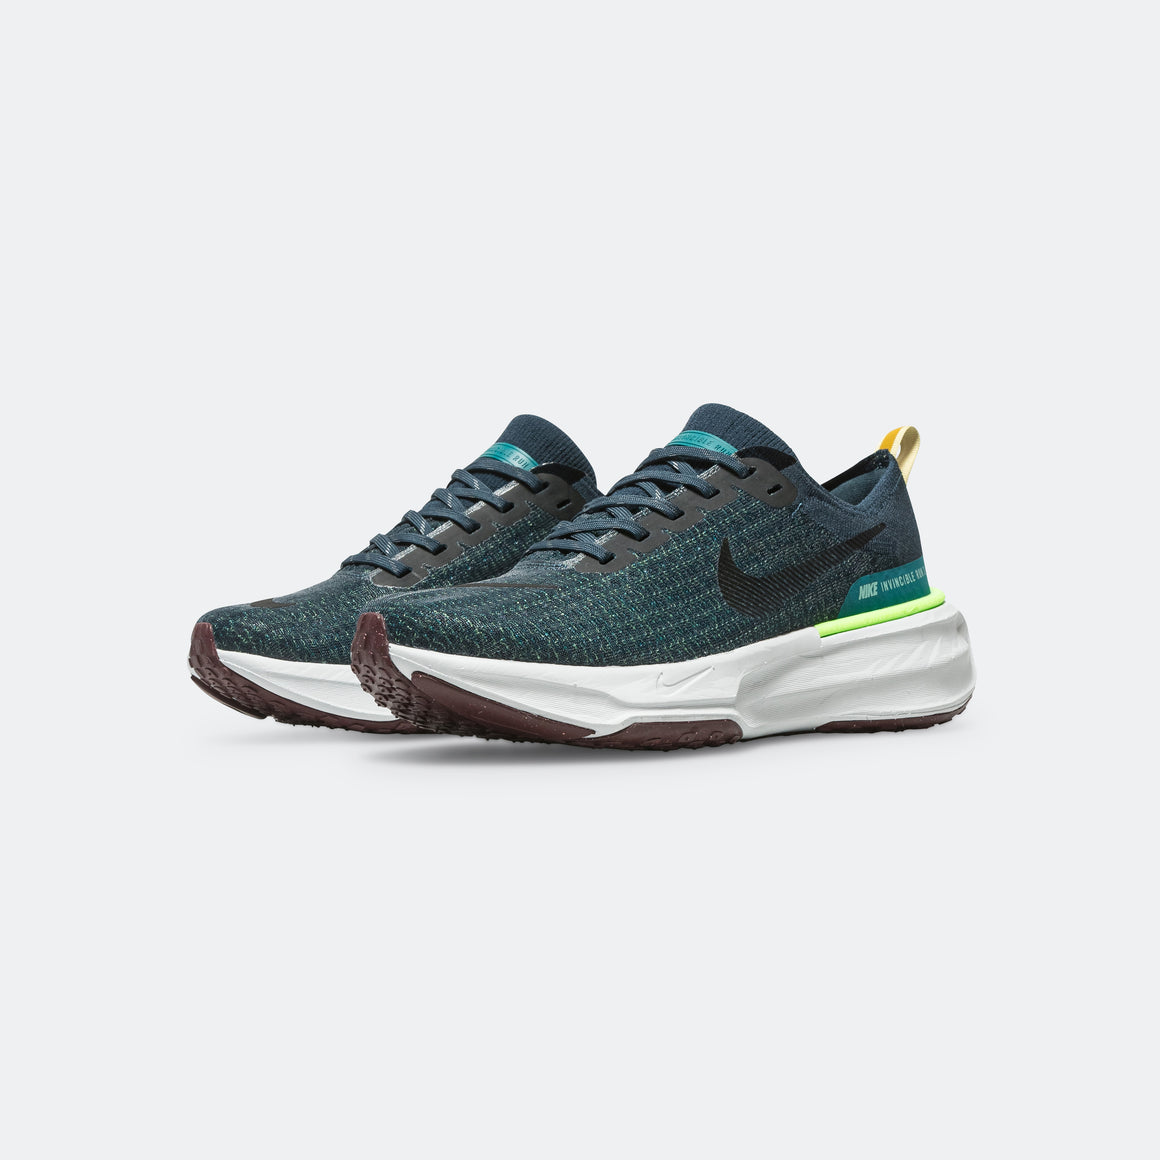 Mens ZoomX Invincible Run FK 3 - Armory Navy/Black-Geode Teal-Buff Gold